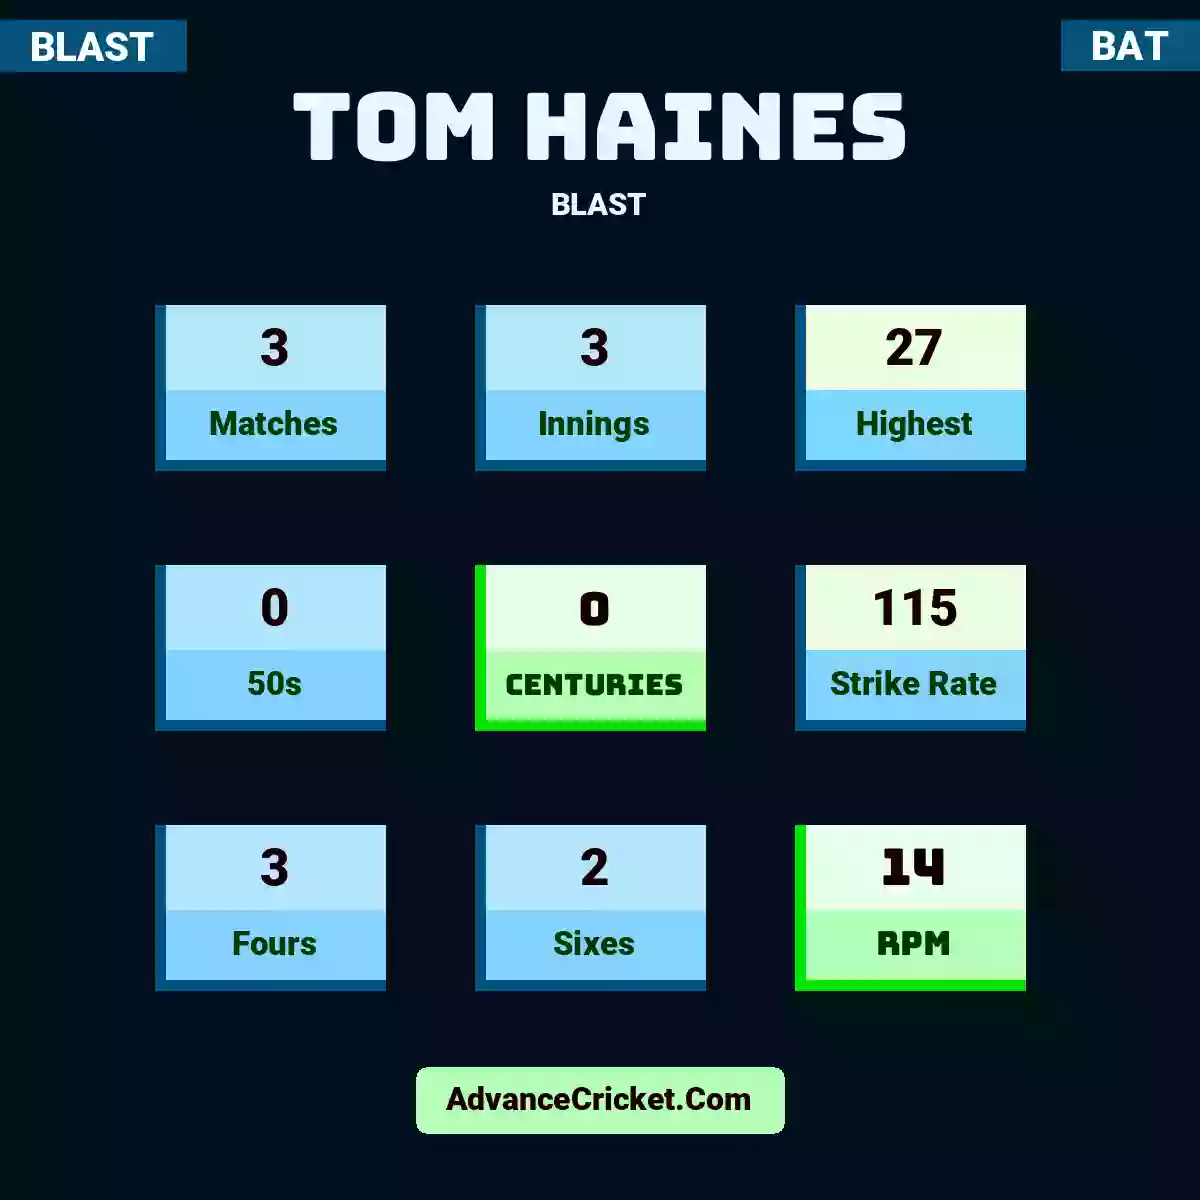 Tom Haines BLAST , Tom Haines played 3 matches, scored 27 runs as highest, 0 half-centuries, and 0 centuries, with a strike rate of 115. T.Haines hit 3 fours and 2 sixes, with an RPM of 14.